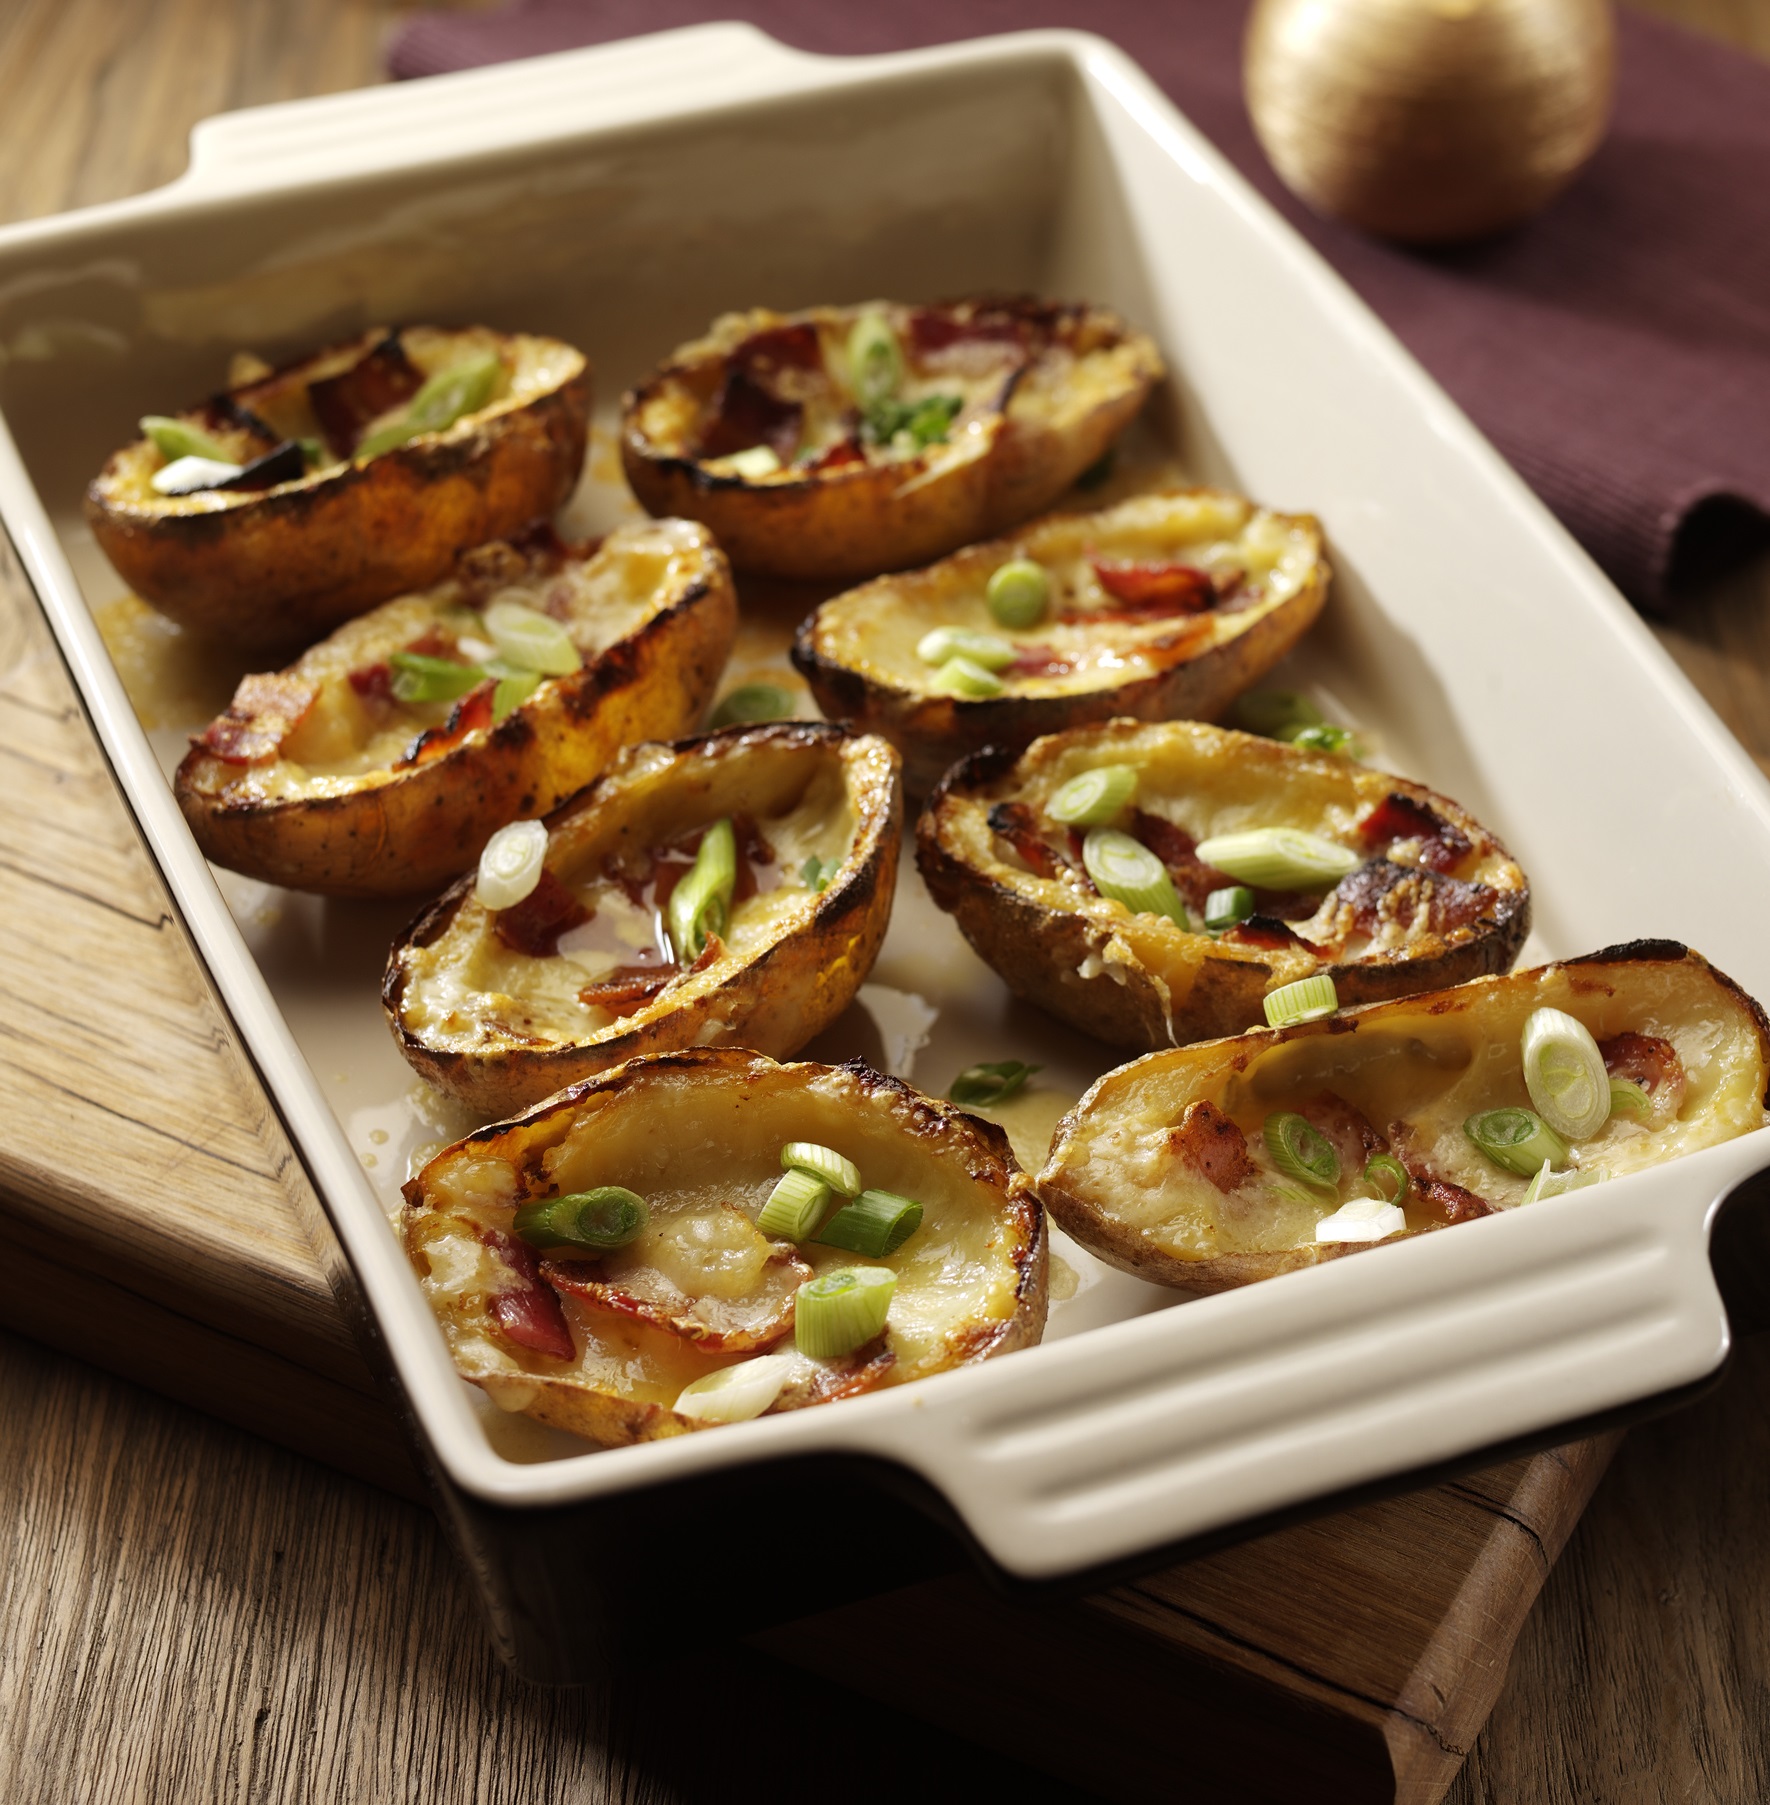 Baked potato skins with melted Godminster cheddar and bacon